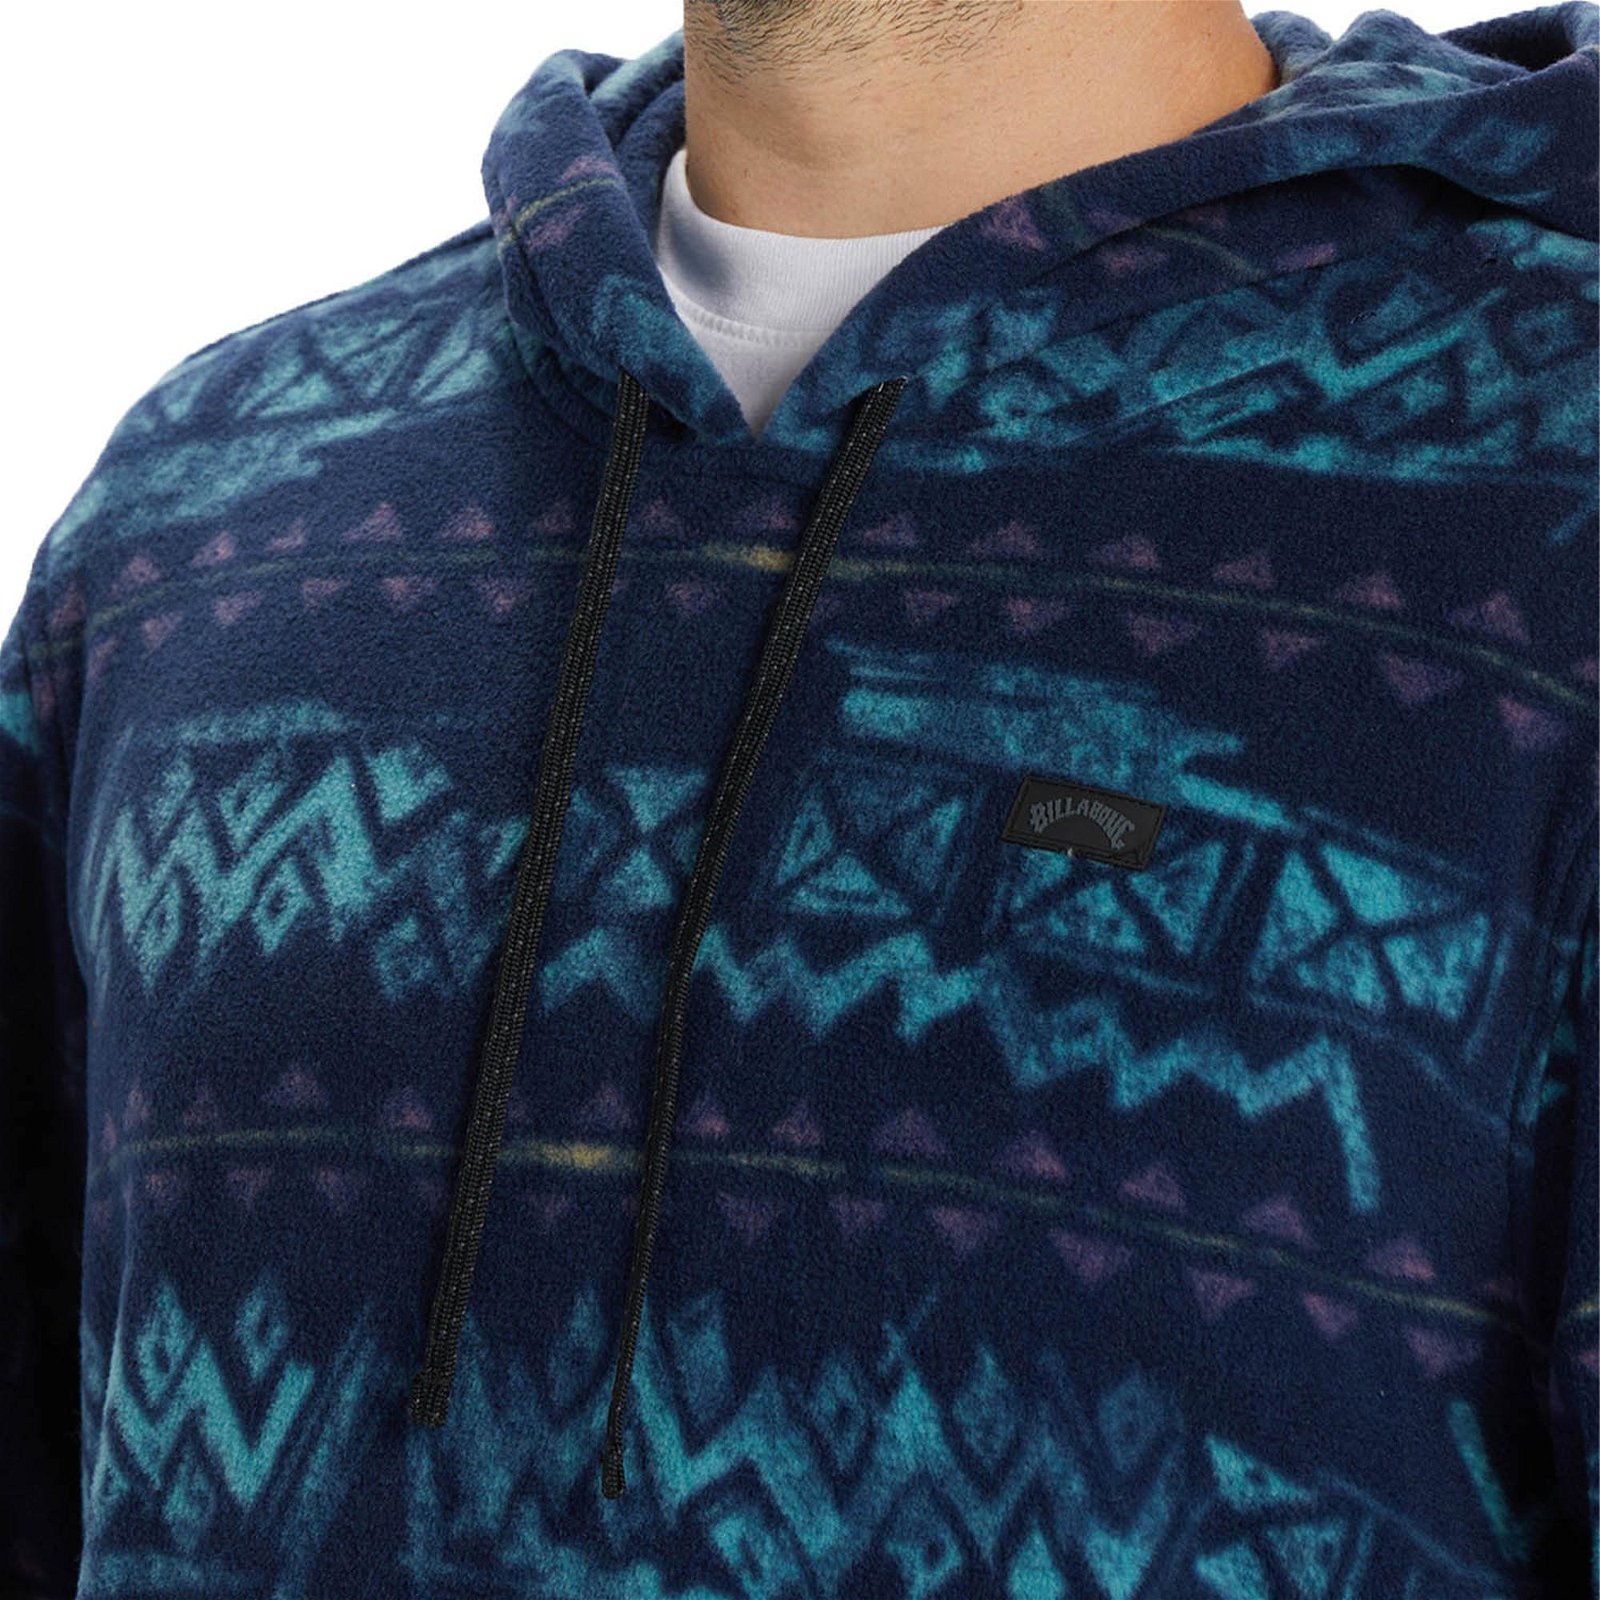 FURNACE PULLOVER